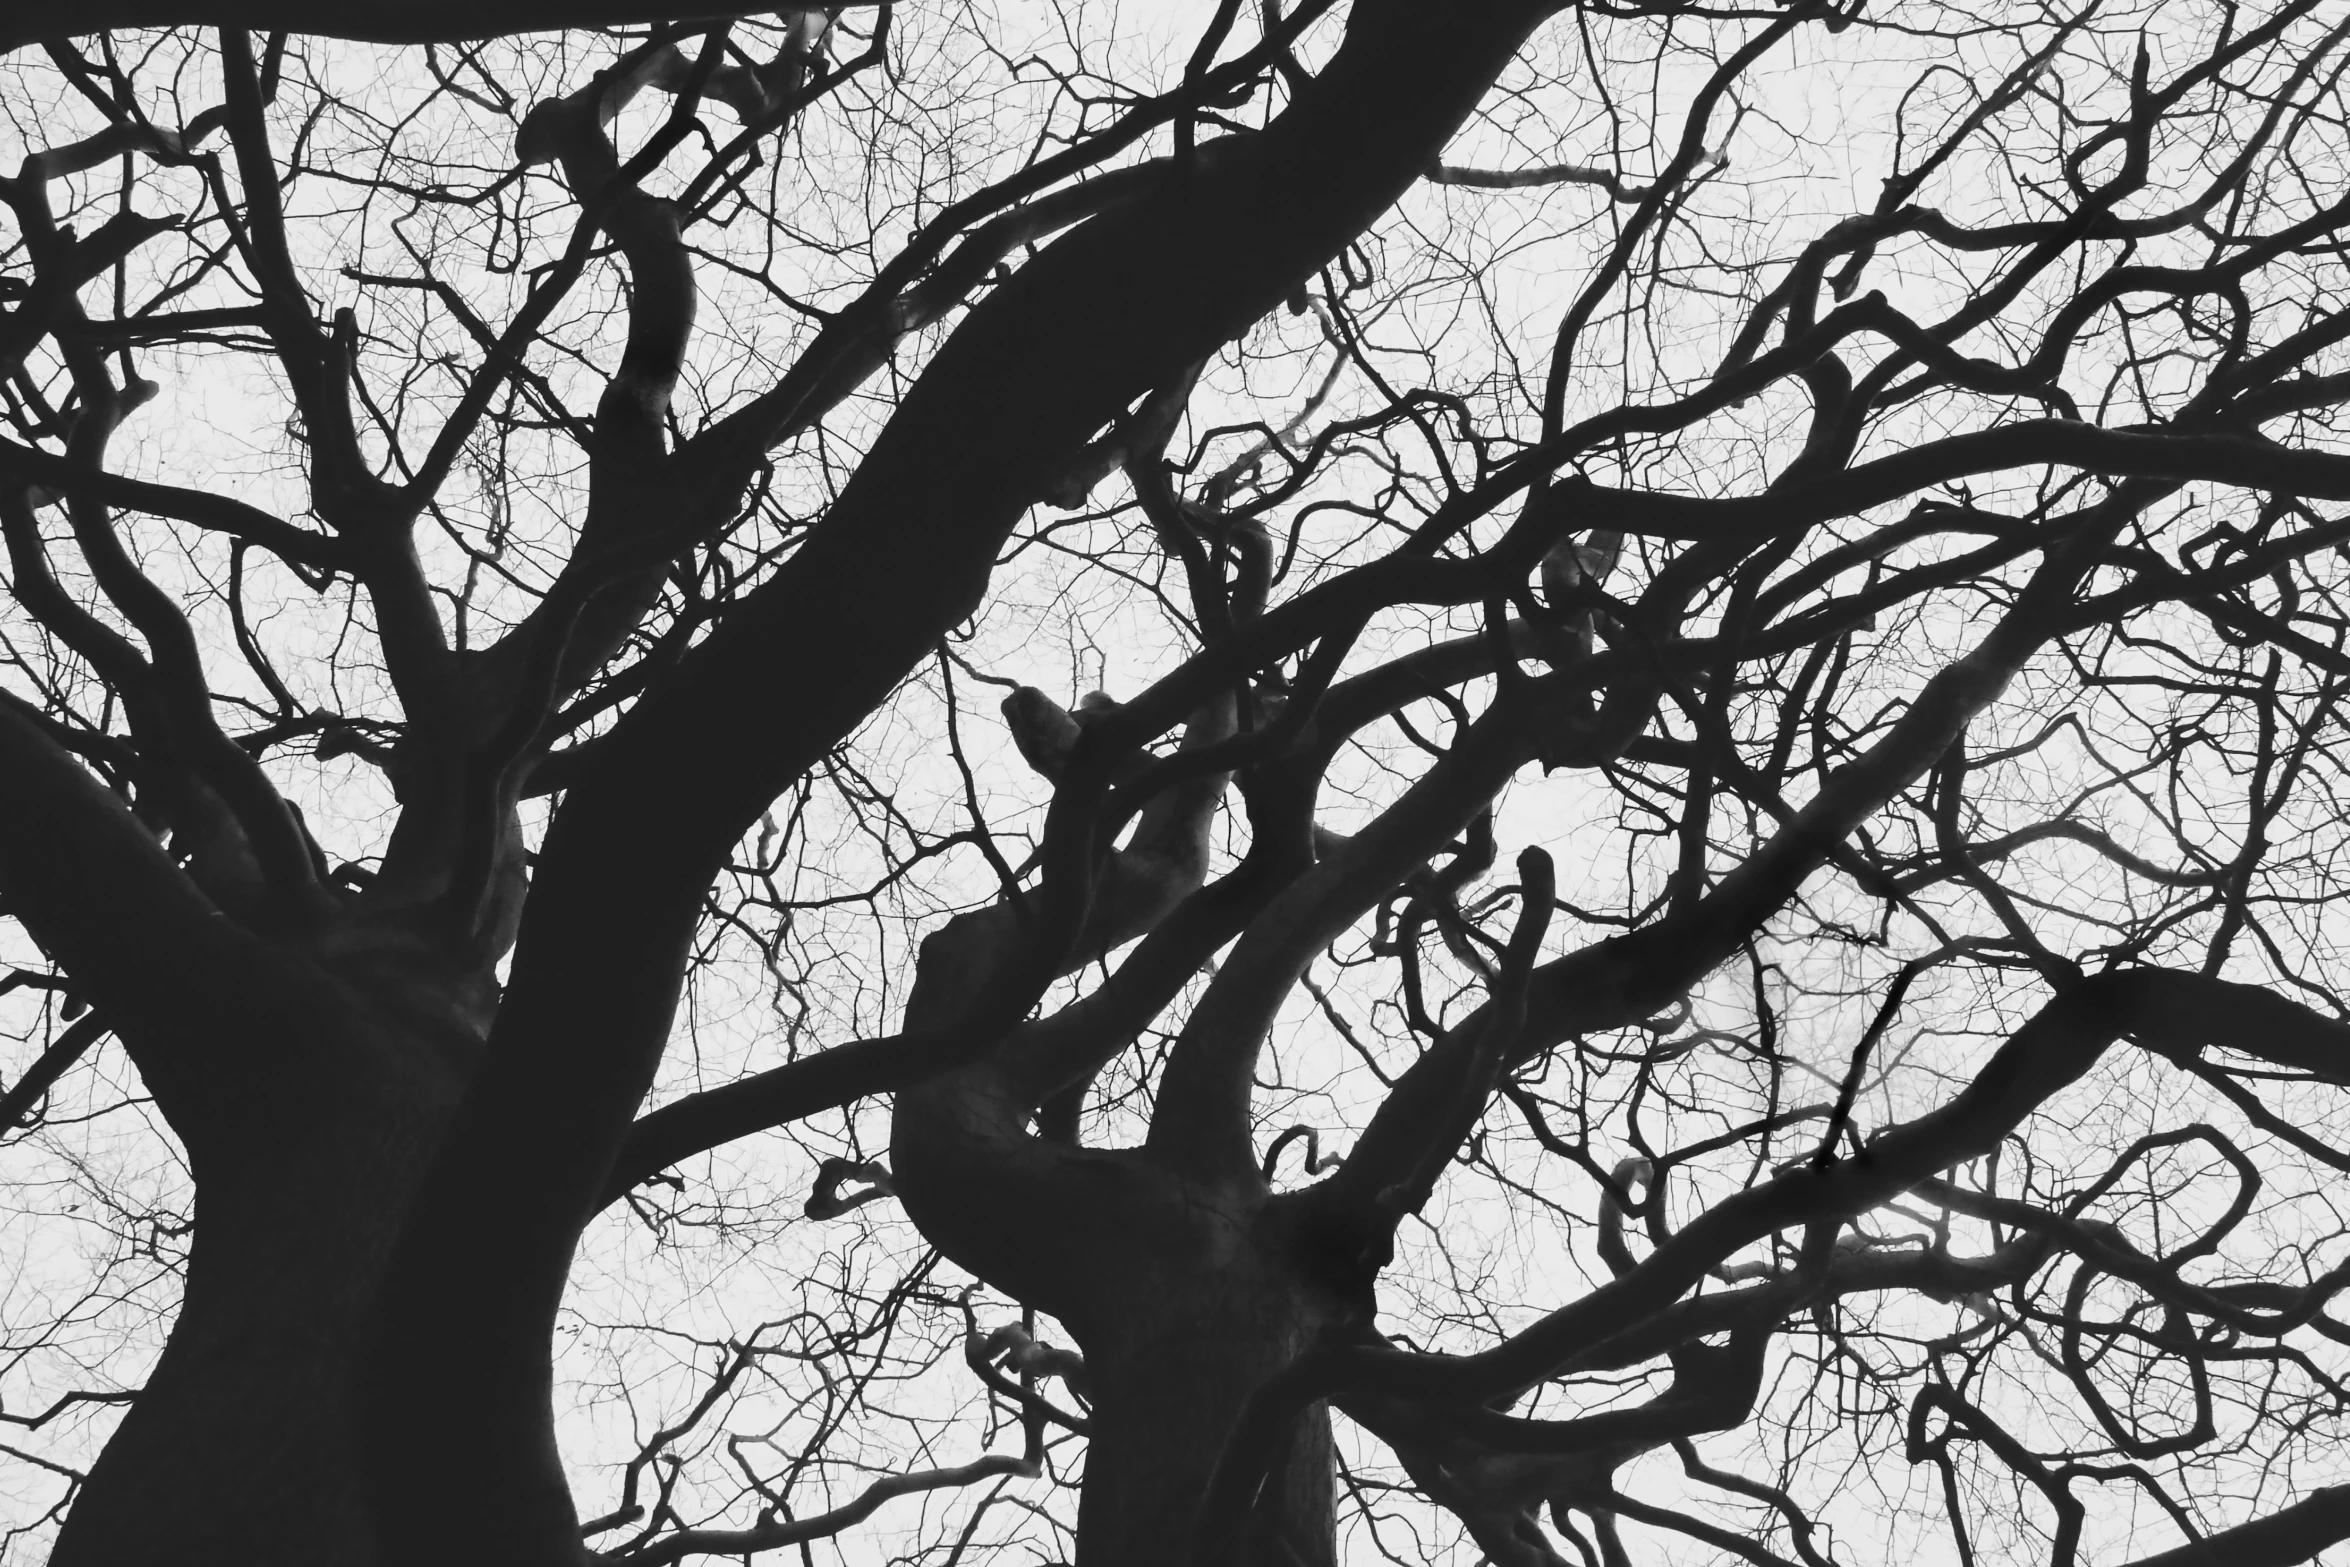 an image of some trees without leaves that is not leafless